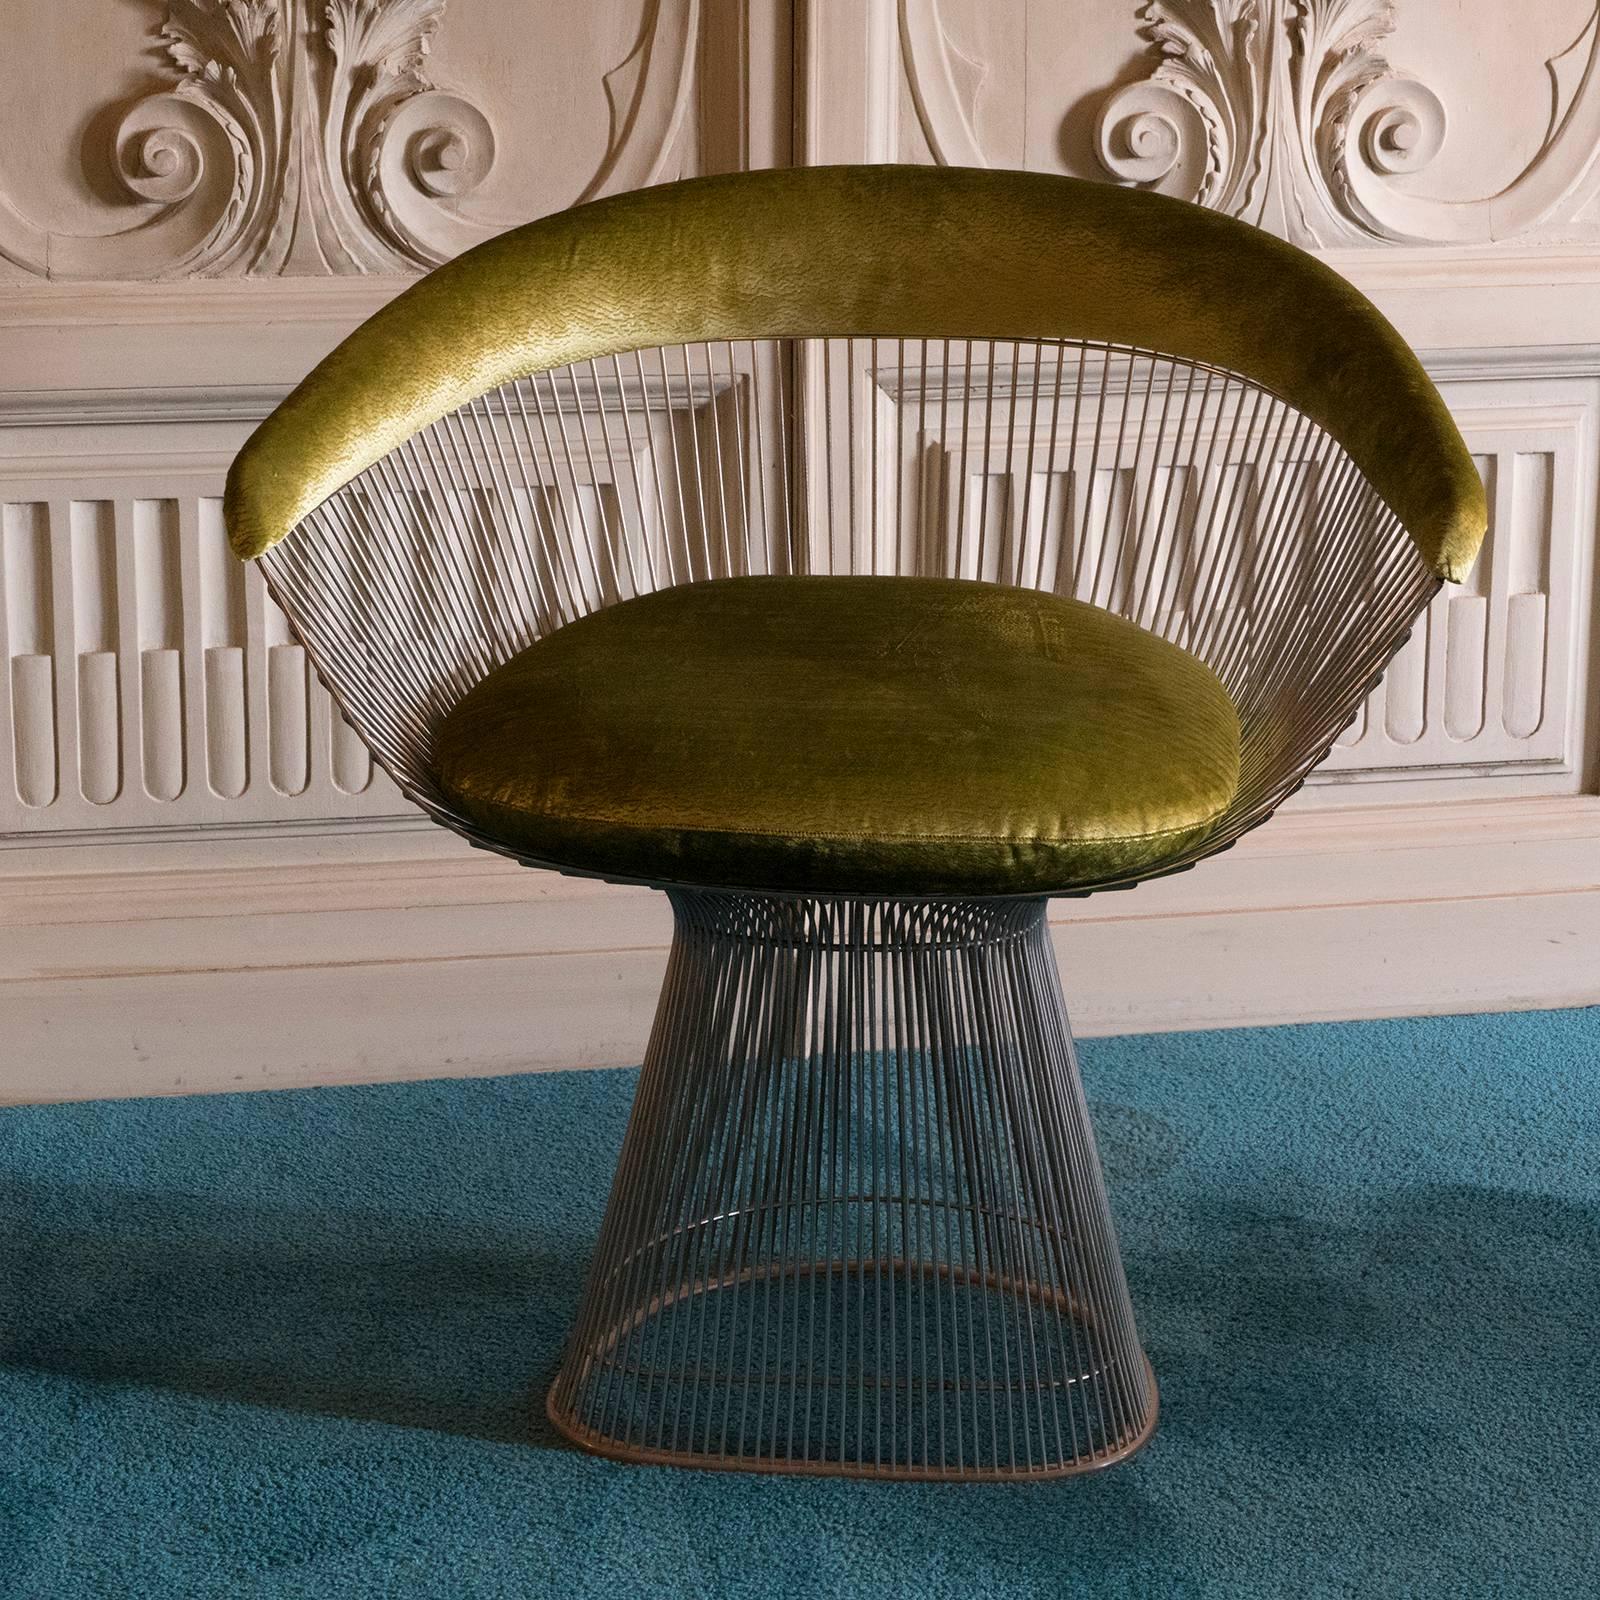 Stainless steel structure with vintage patina, newly reupholstery in lime silk velvet.